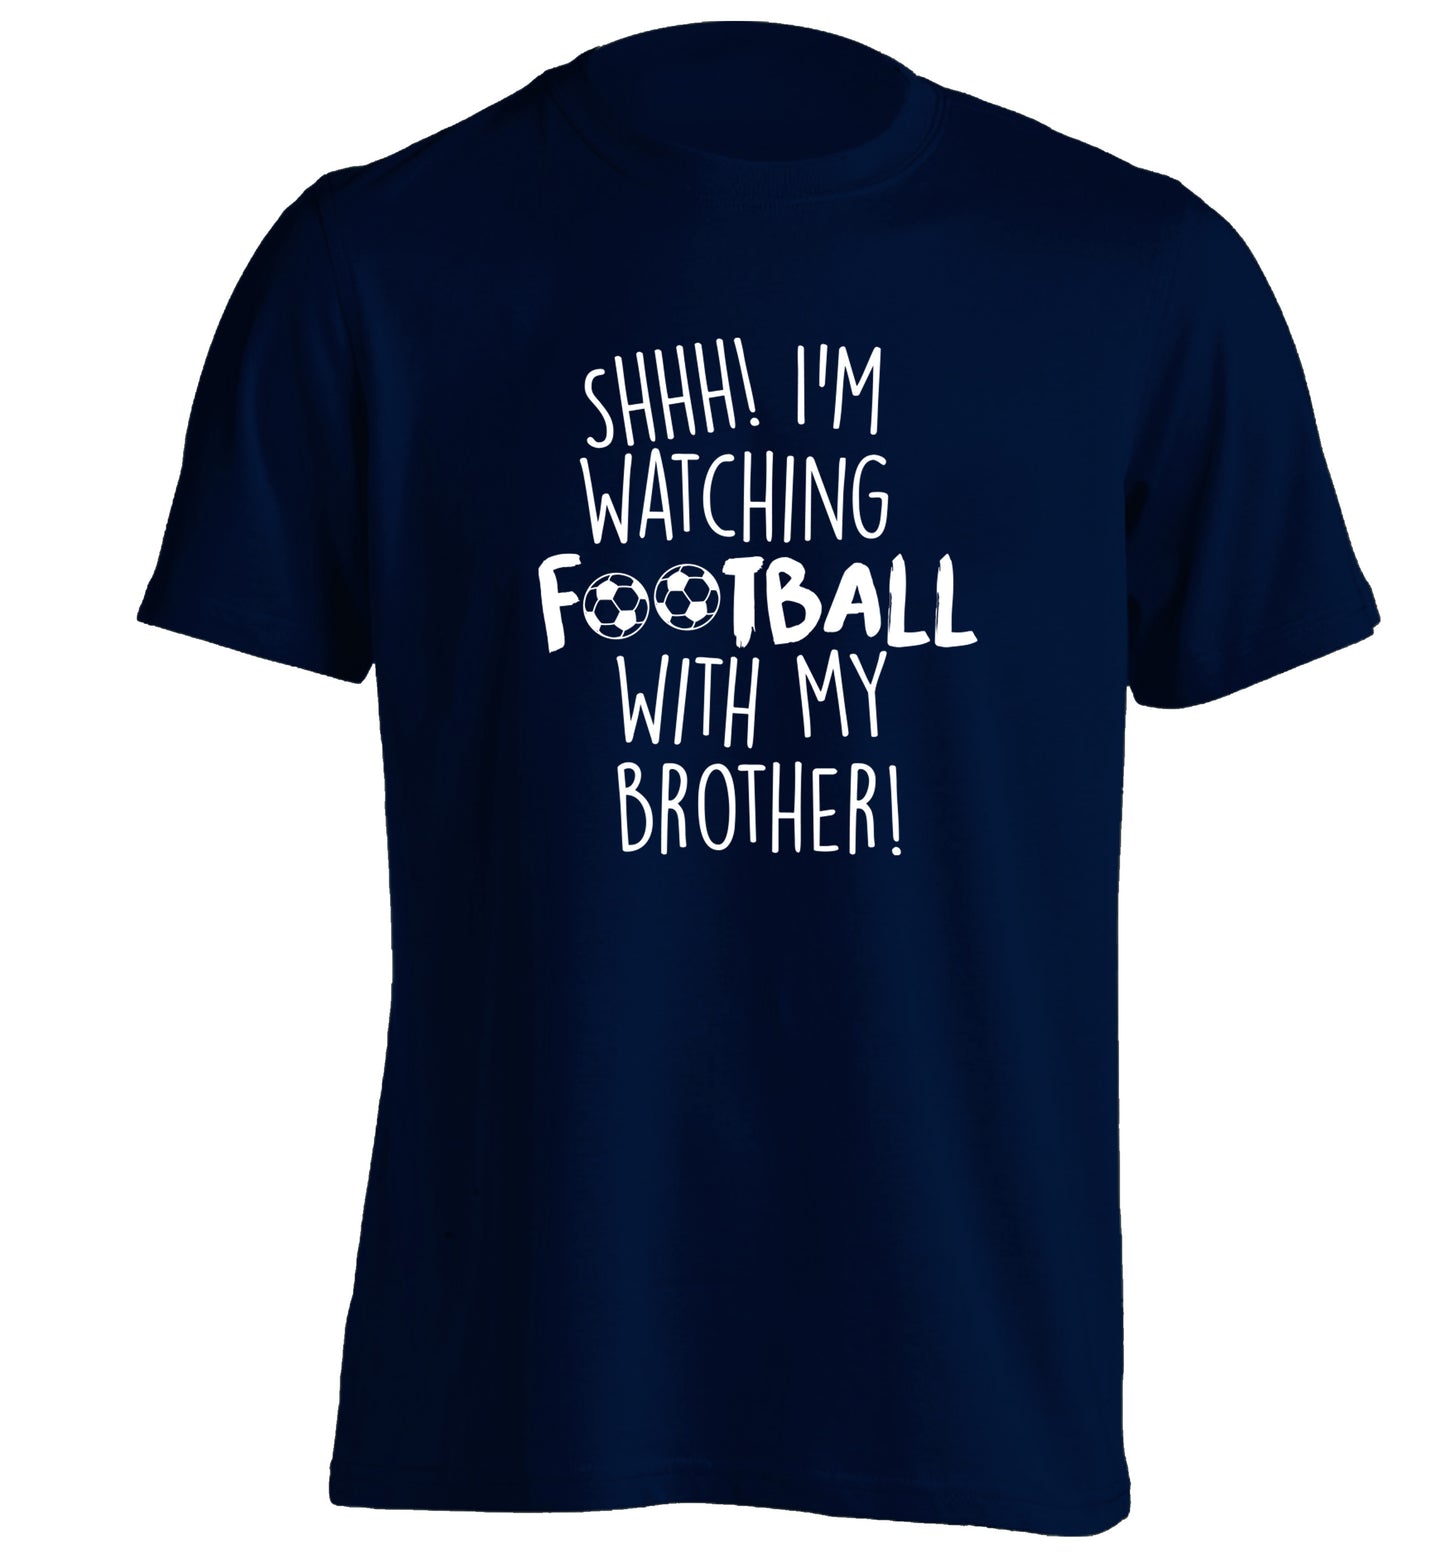 Shhh I'm watching football with my brother adults unisexnavy Tshirt 2XL